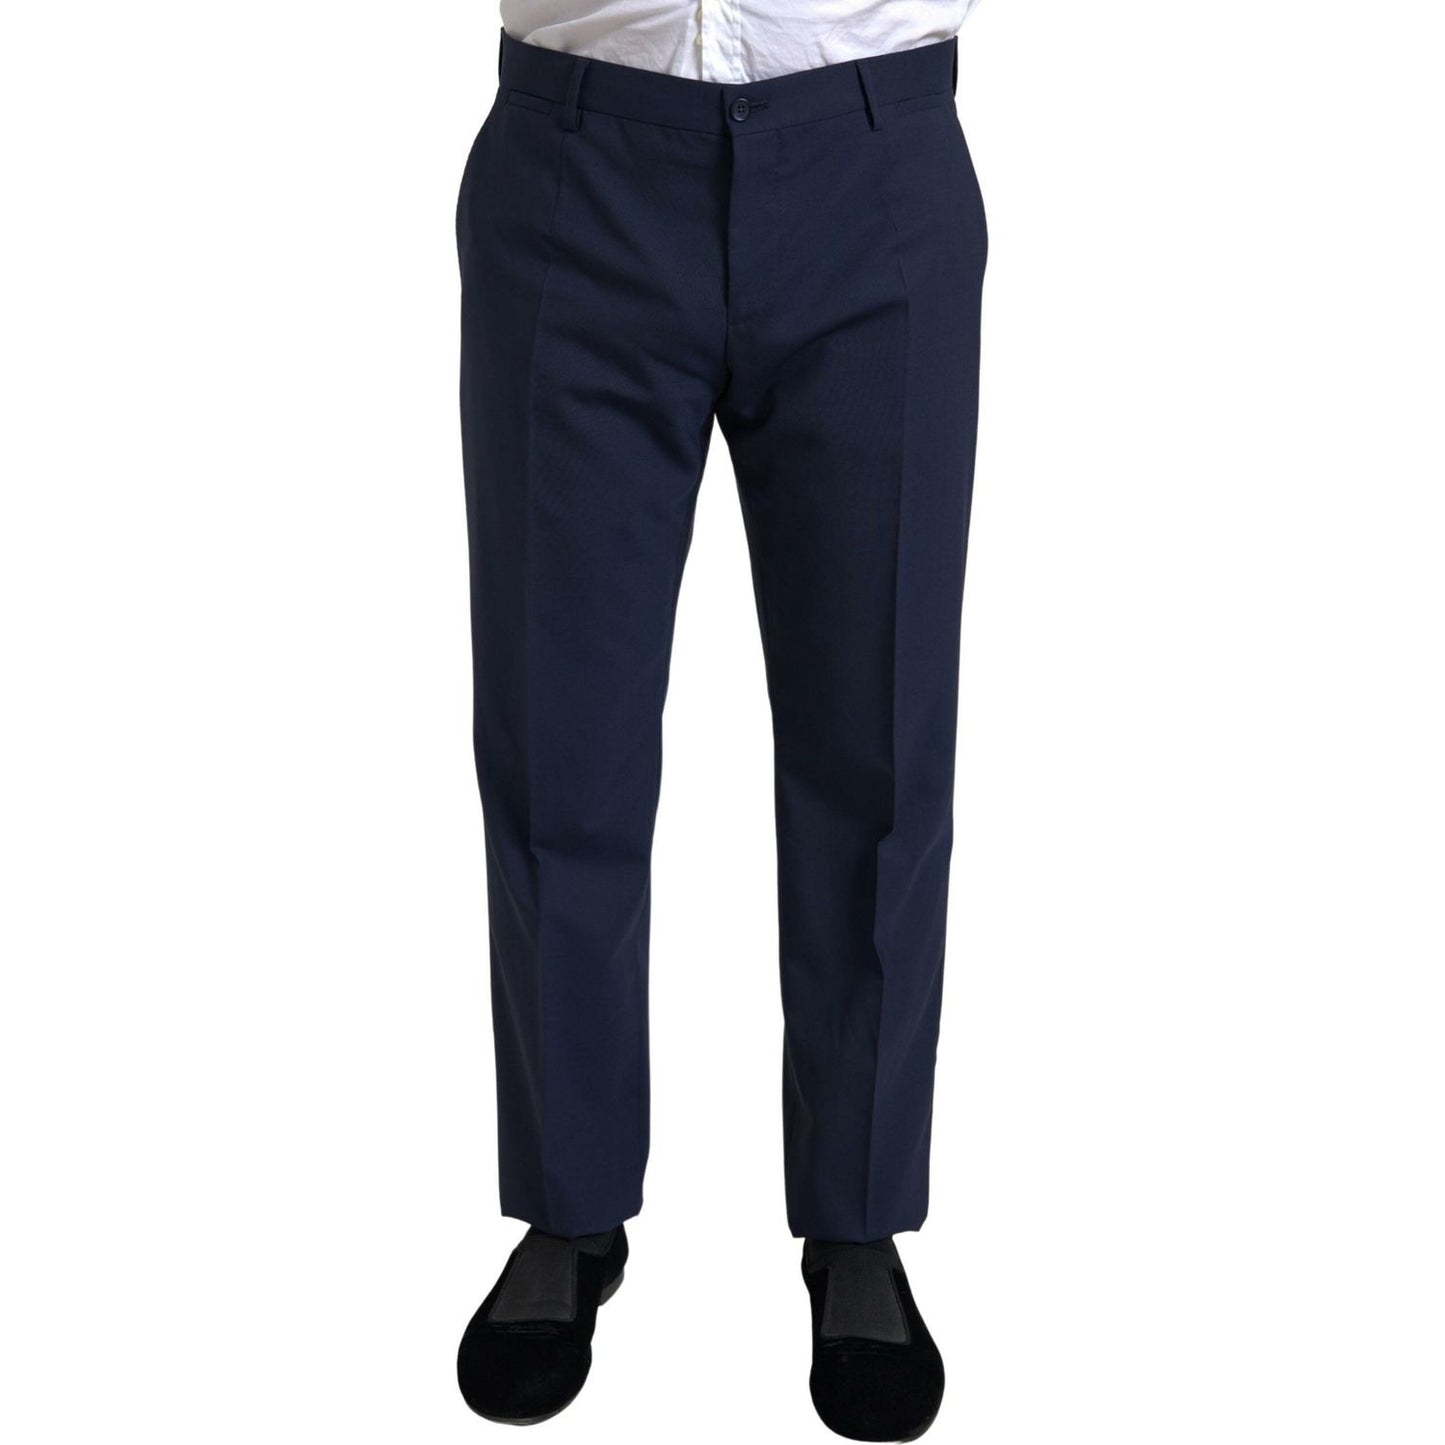 Dolce & Gabbana Elegant Blue Martini Slim Fit Two-Piece Suit blue-2-piece-single-breasted-martini-suit-1